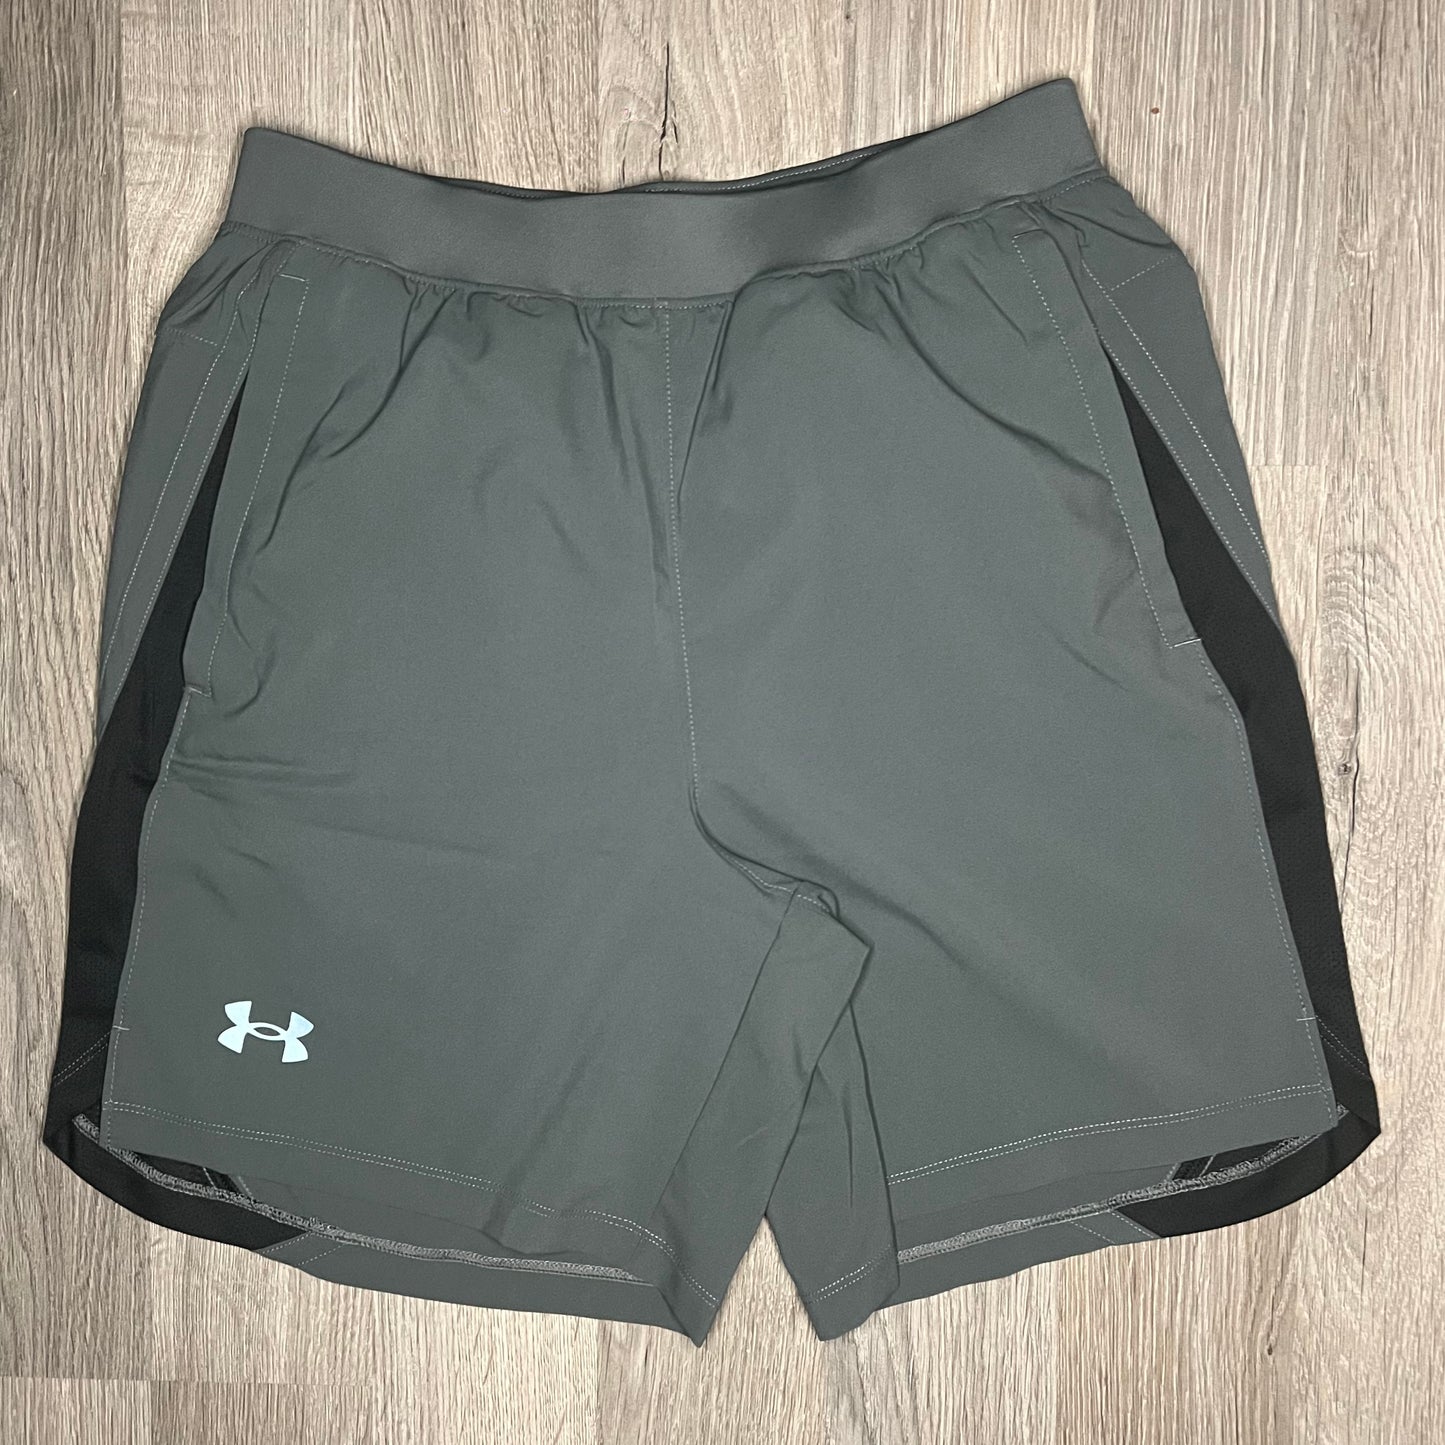 Under Armour Launch Shorts - Grey / Black